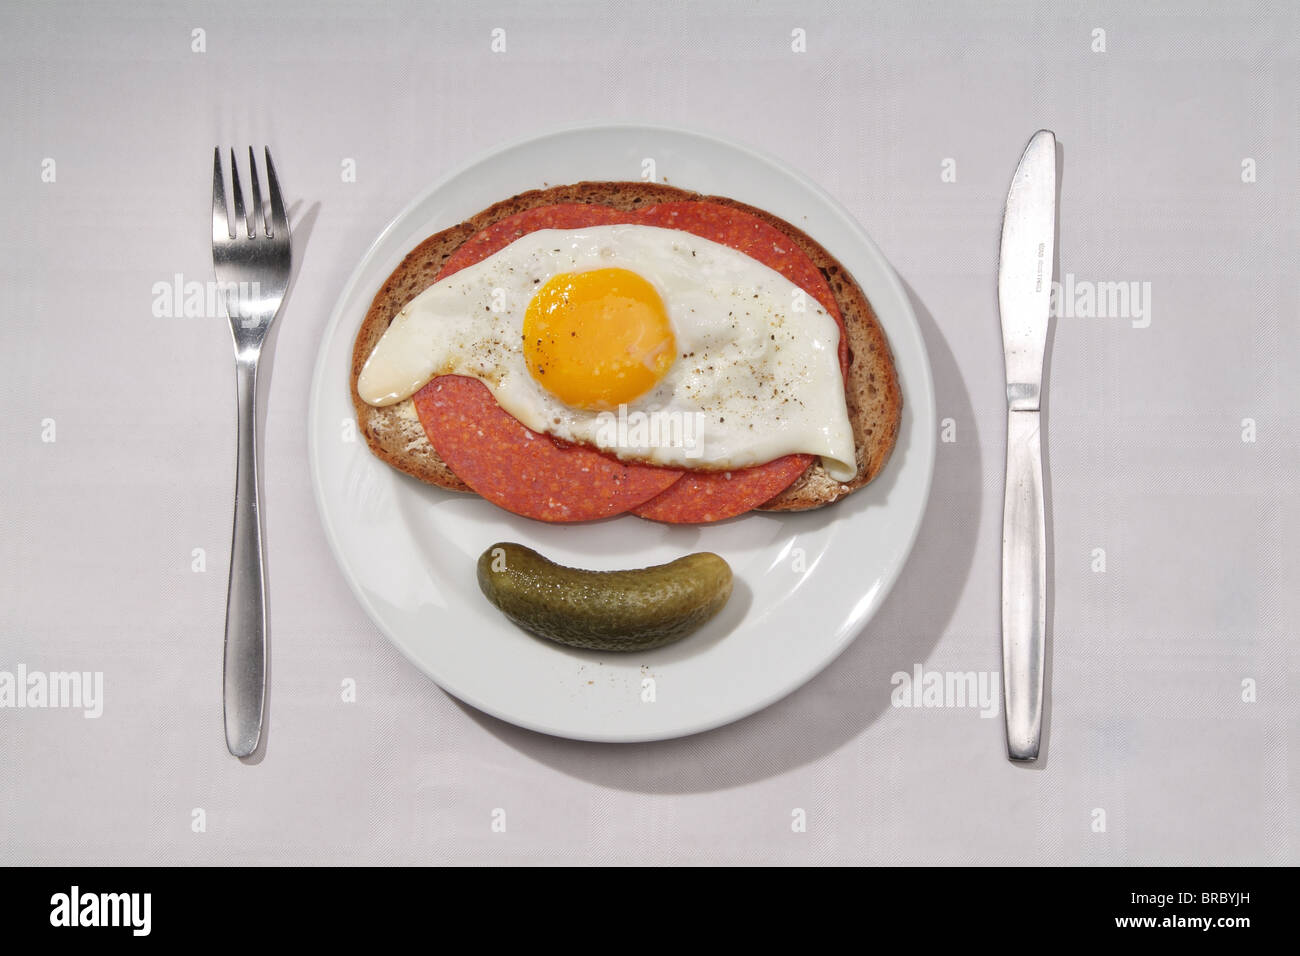 A sandwich with salami and fried eggs Stock Photo